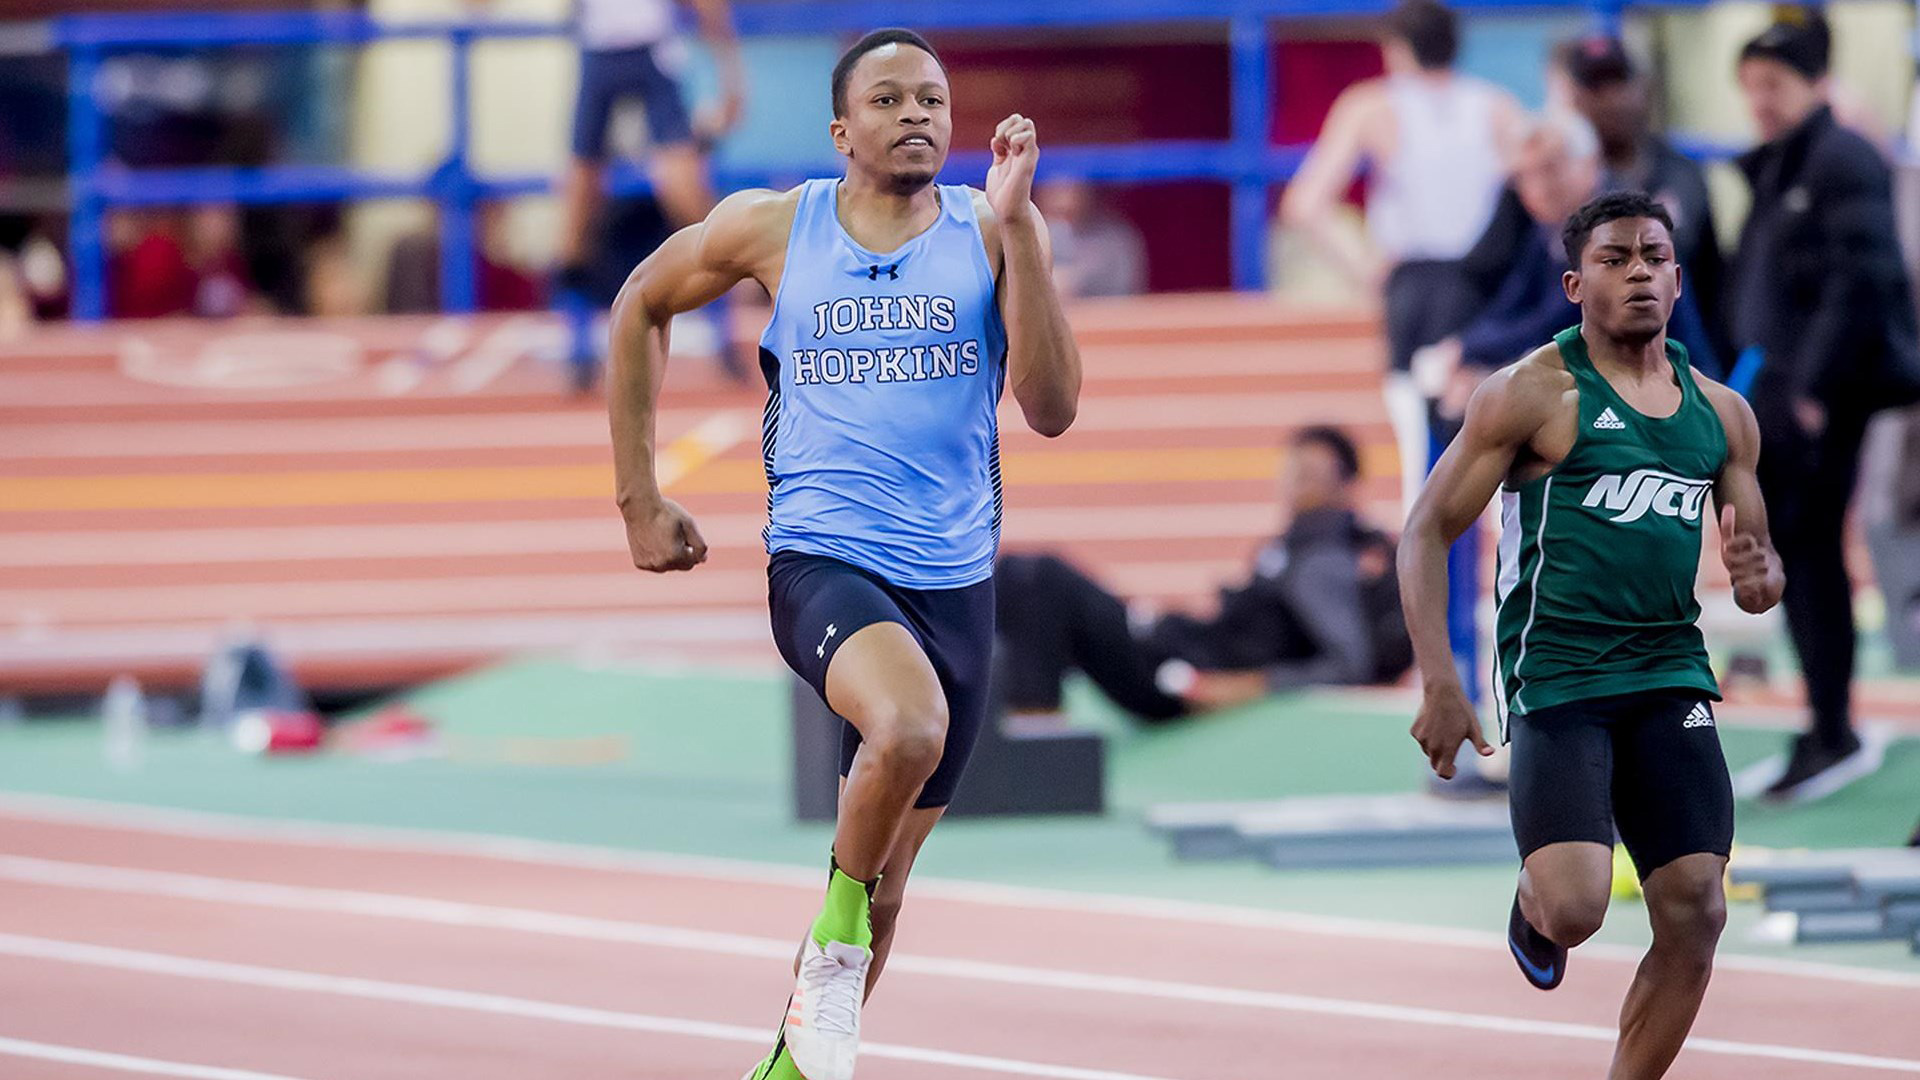 Justin Canedy, Johns Hopkins, Field Athlete of the Week